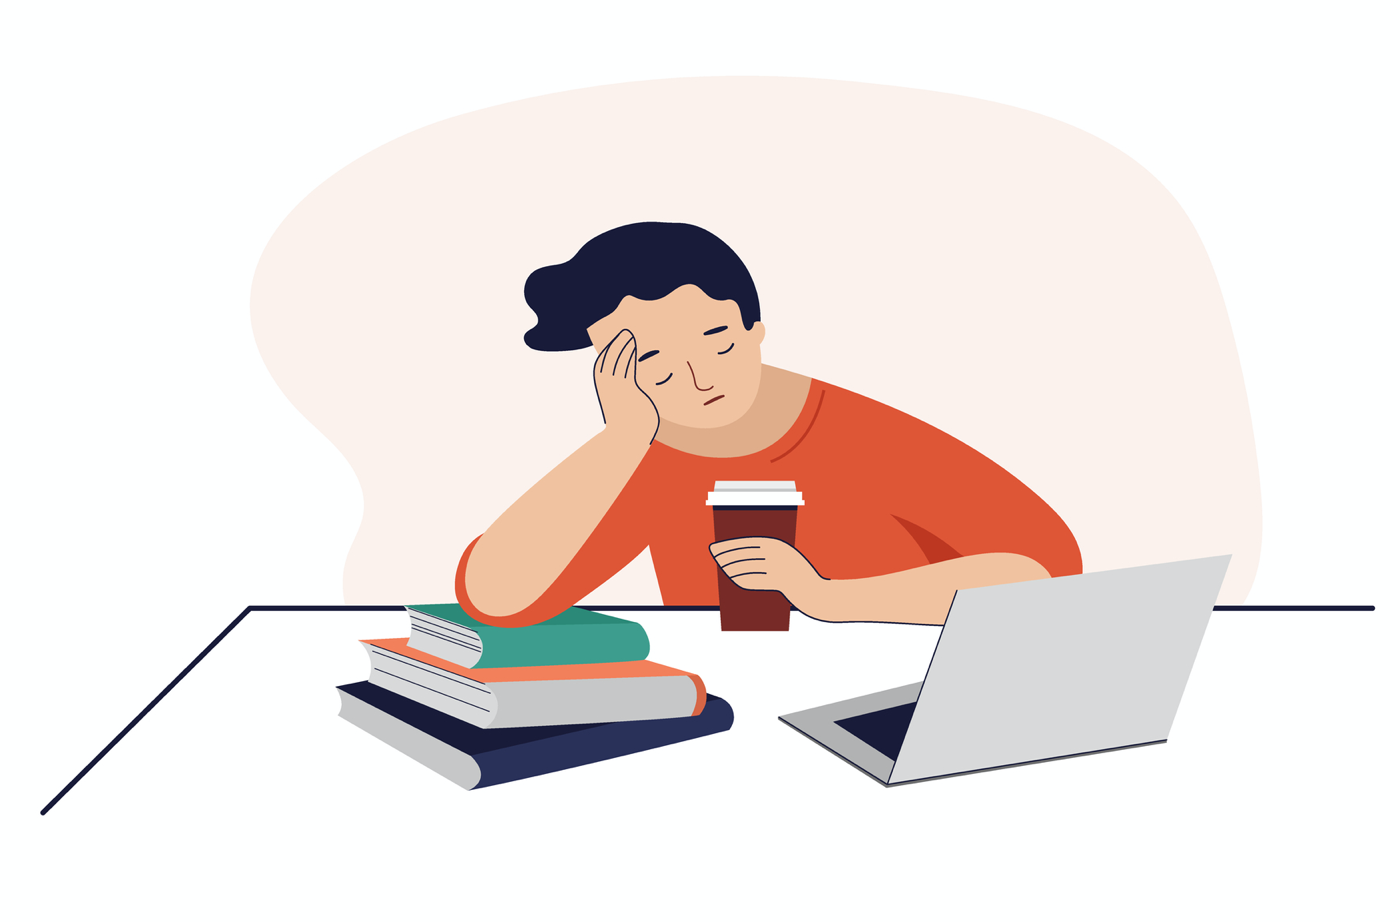 an illustration of a person slumping over at a desk, tired, holding a coffee cup with a stack of three books and a laptop on the desk